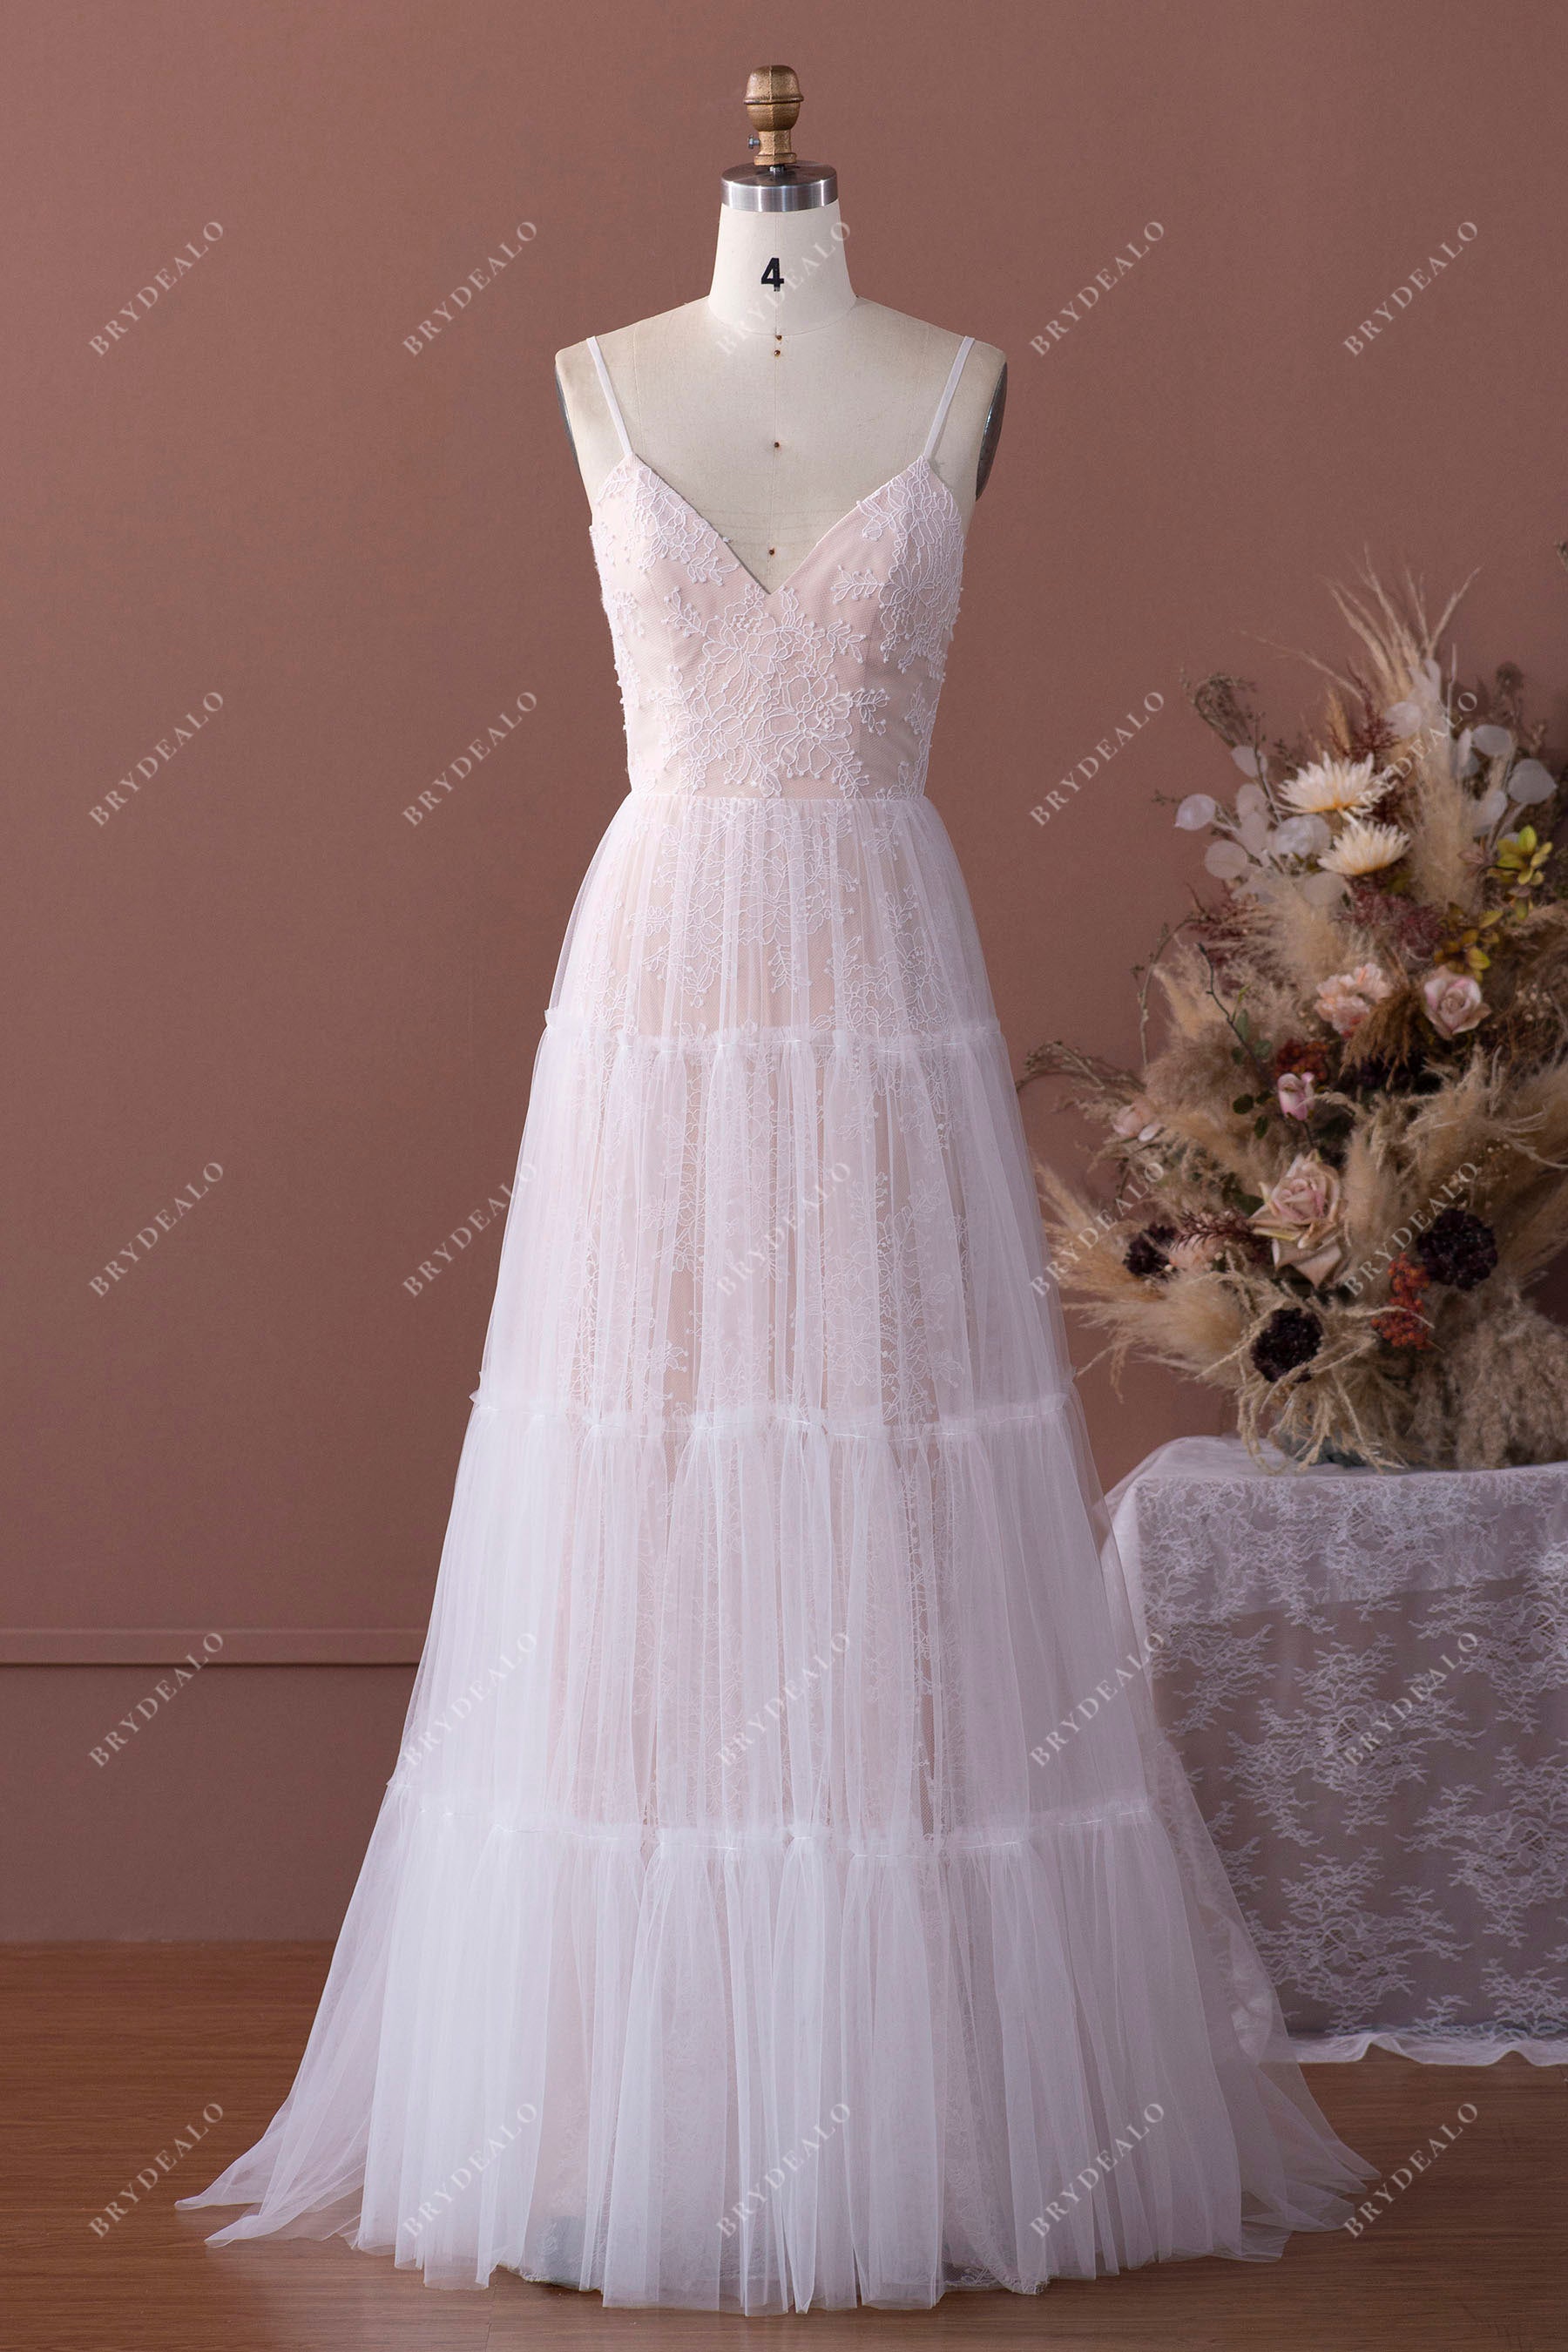 Boho Private Label Wedding Gown